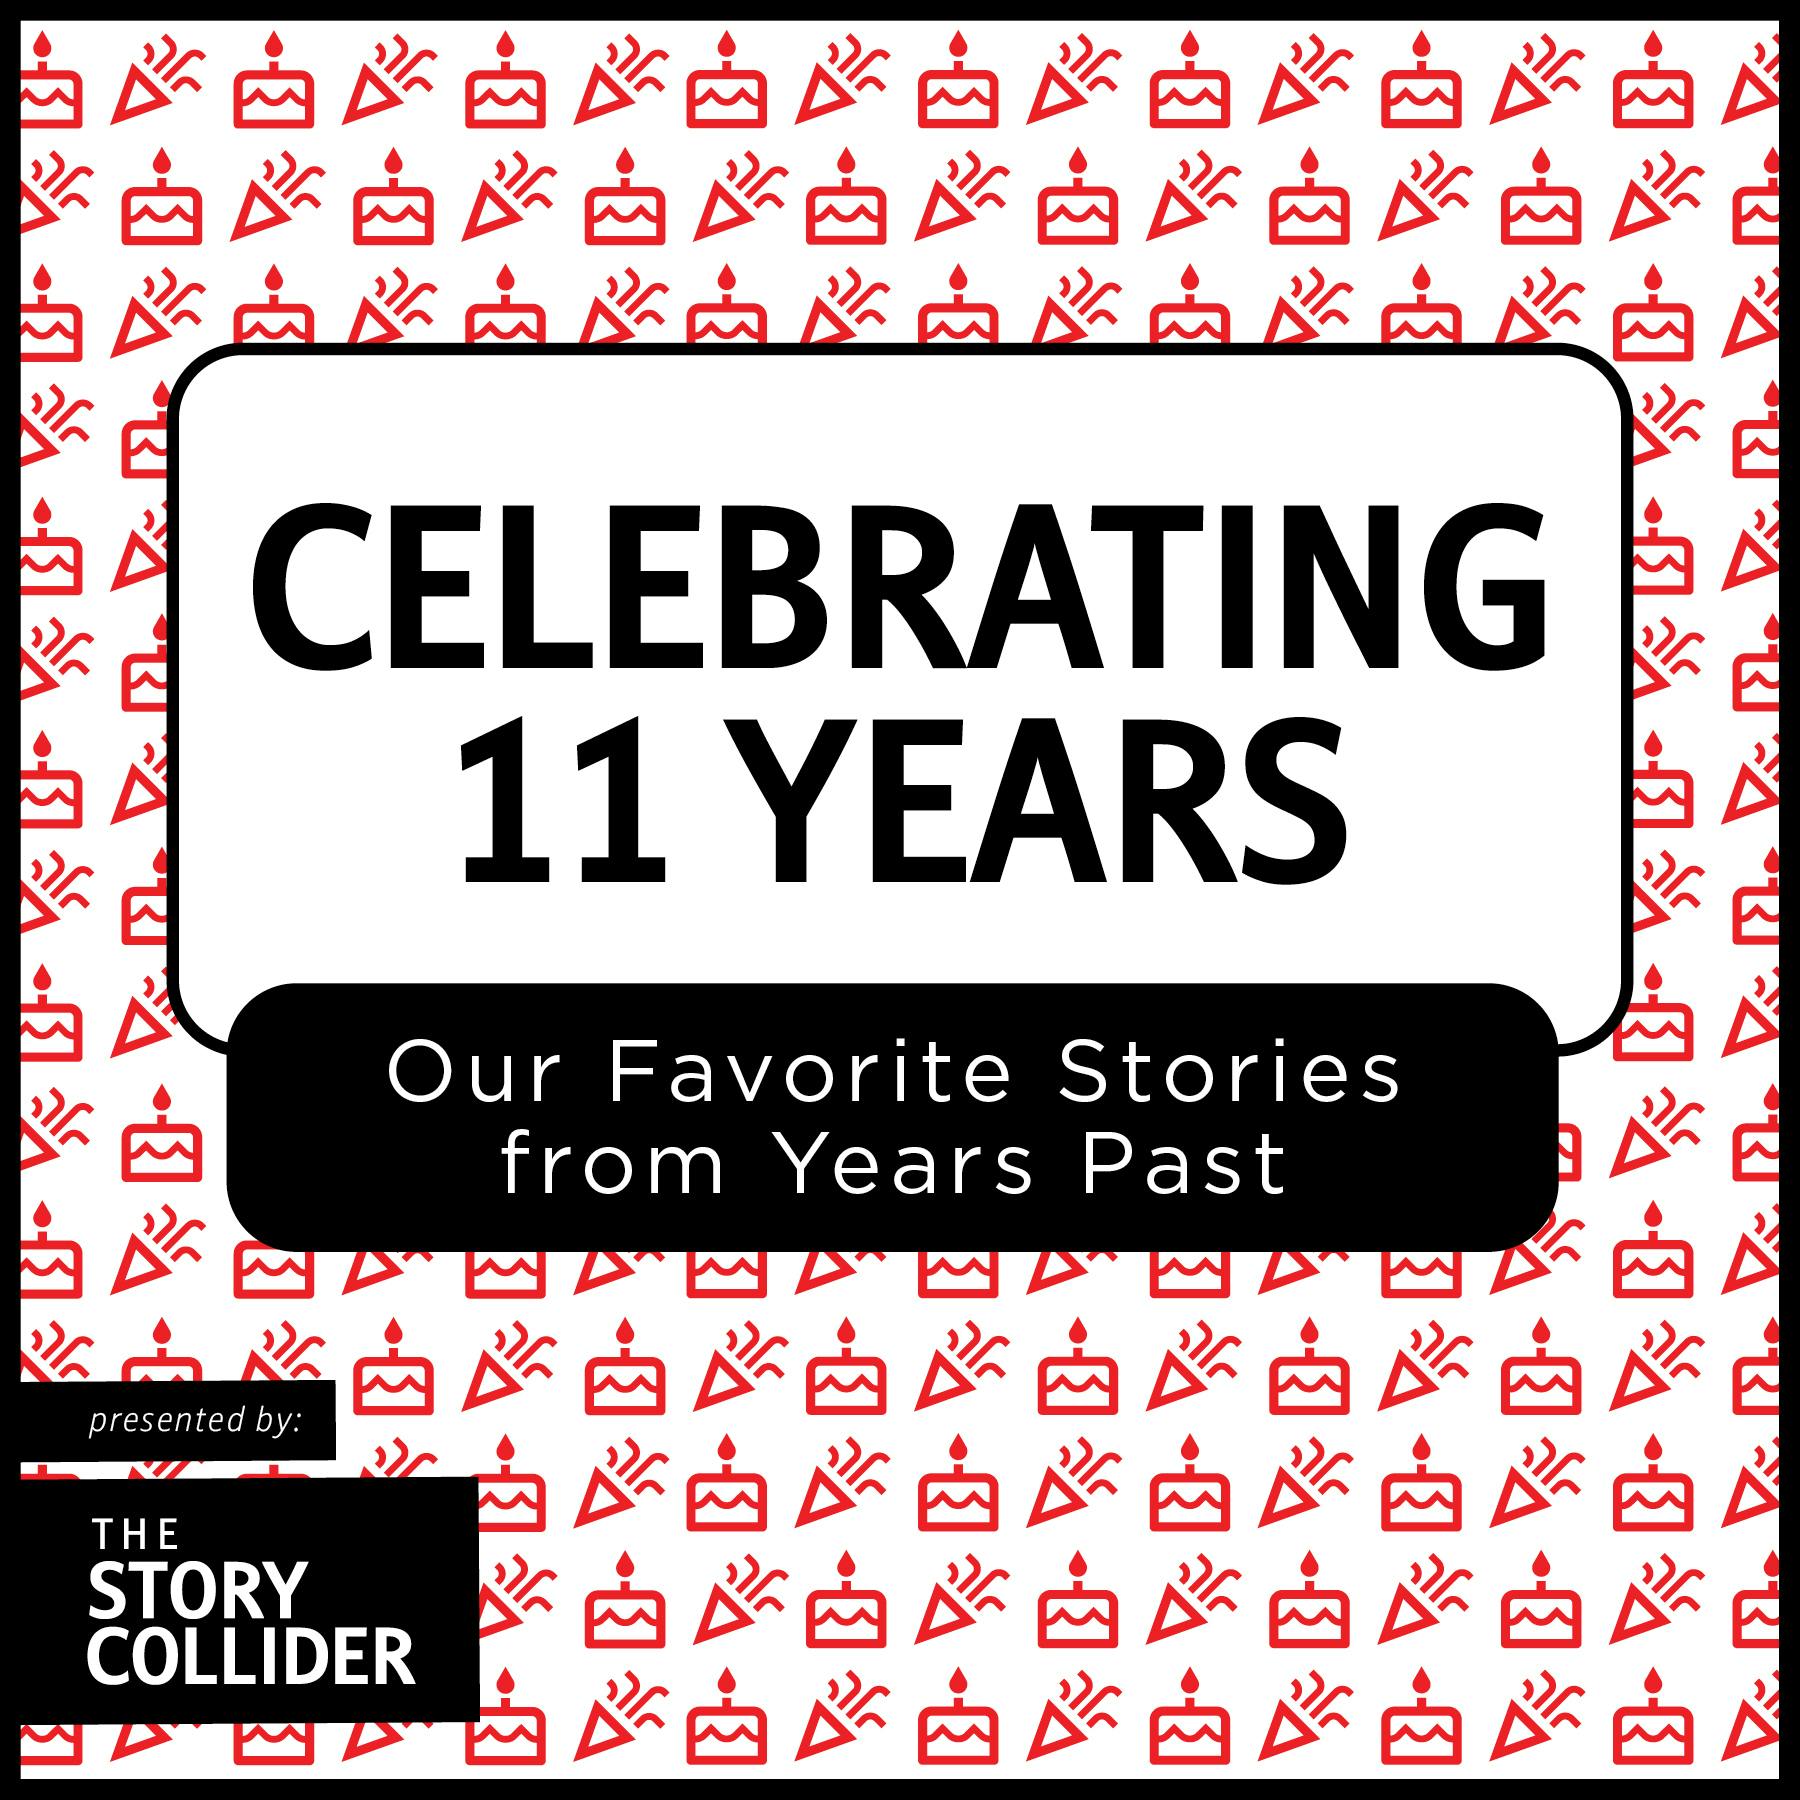 Celebrating 11 Years: Our Favorite Stories from Years Past